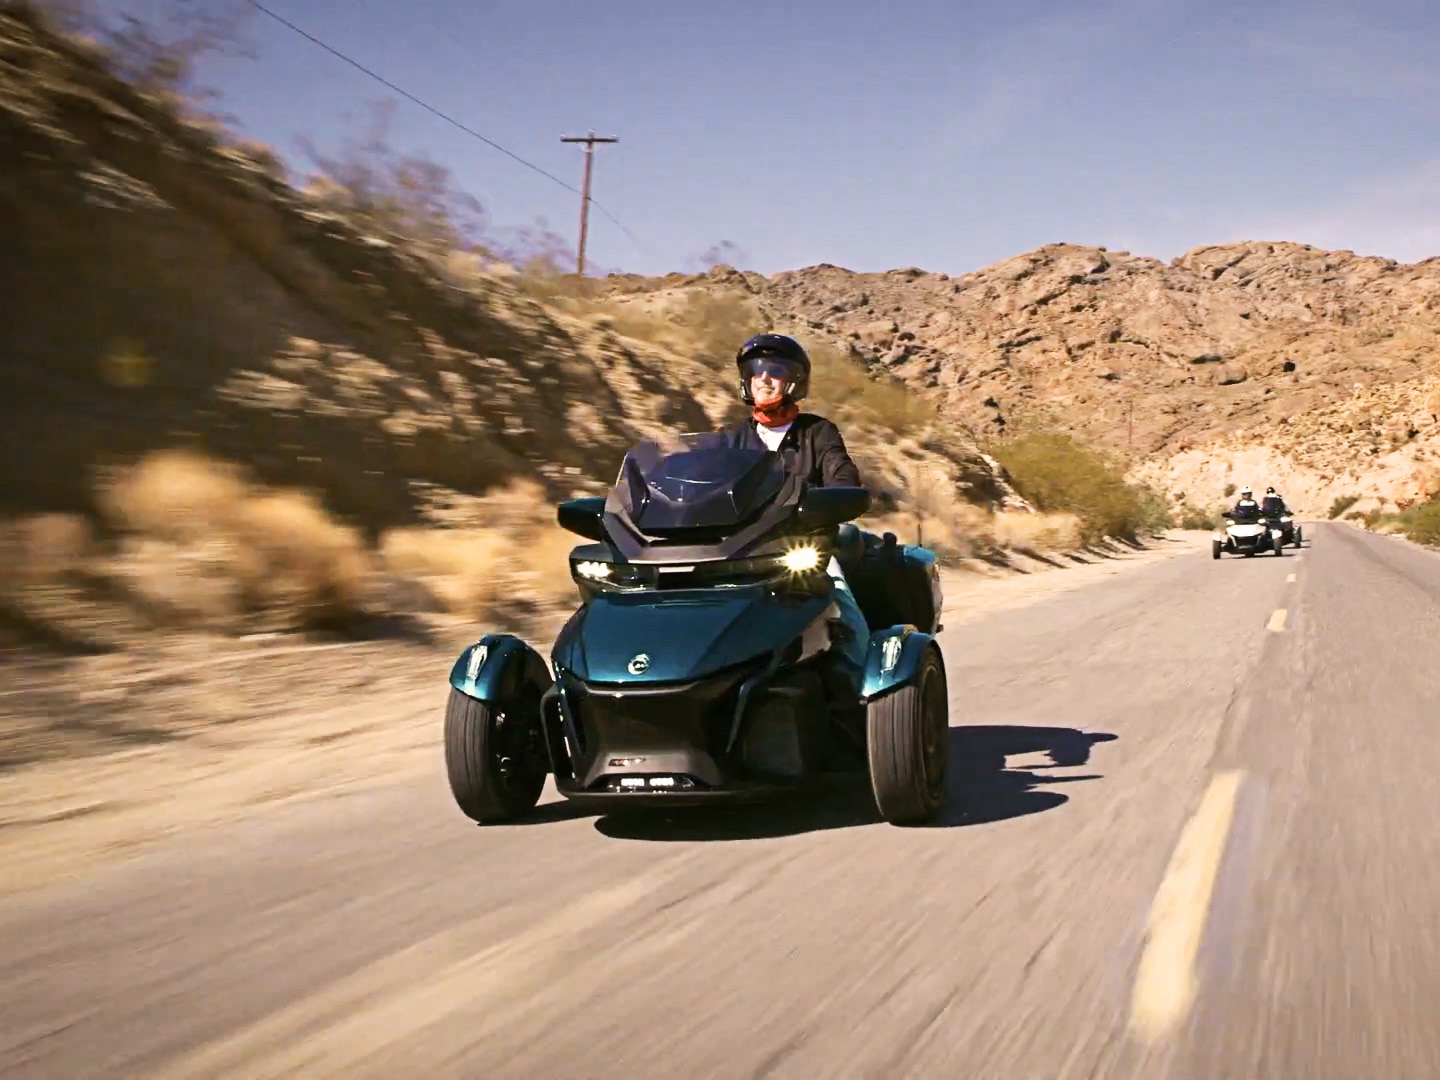 Tom Dorcey riding Can-Am Spyder with his friends